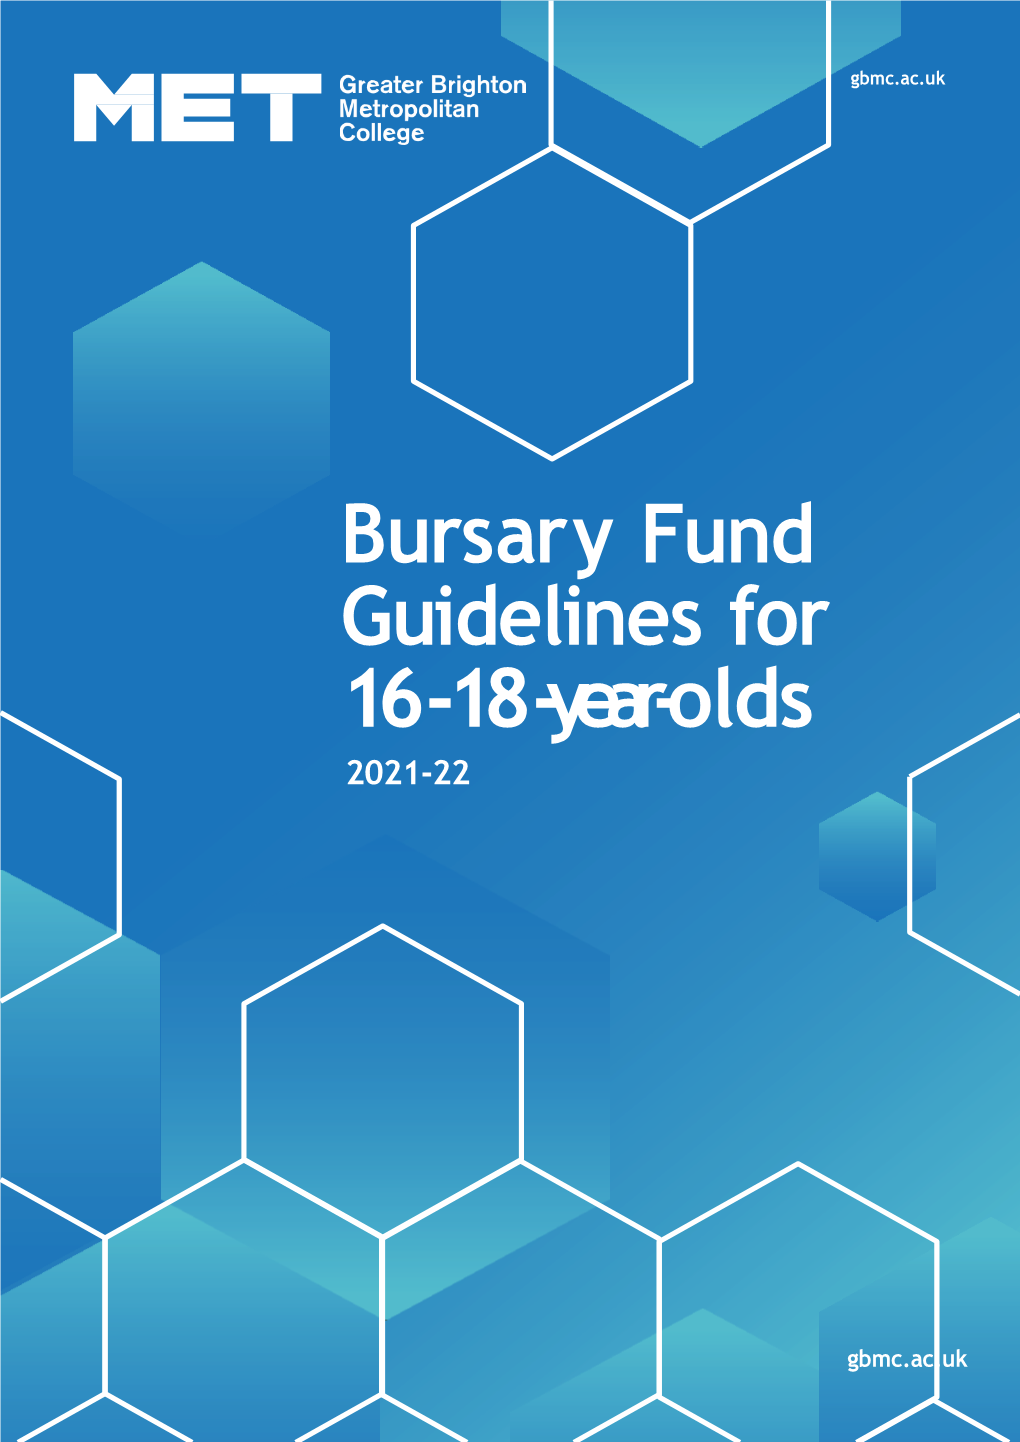 View Our Bursary Fund Guidelines for 16-18 Year Olds